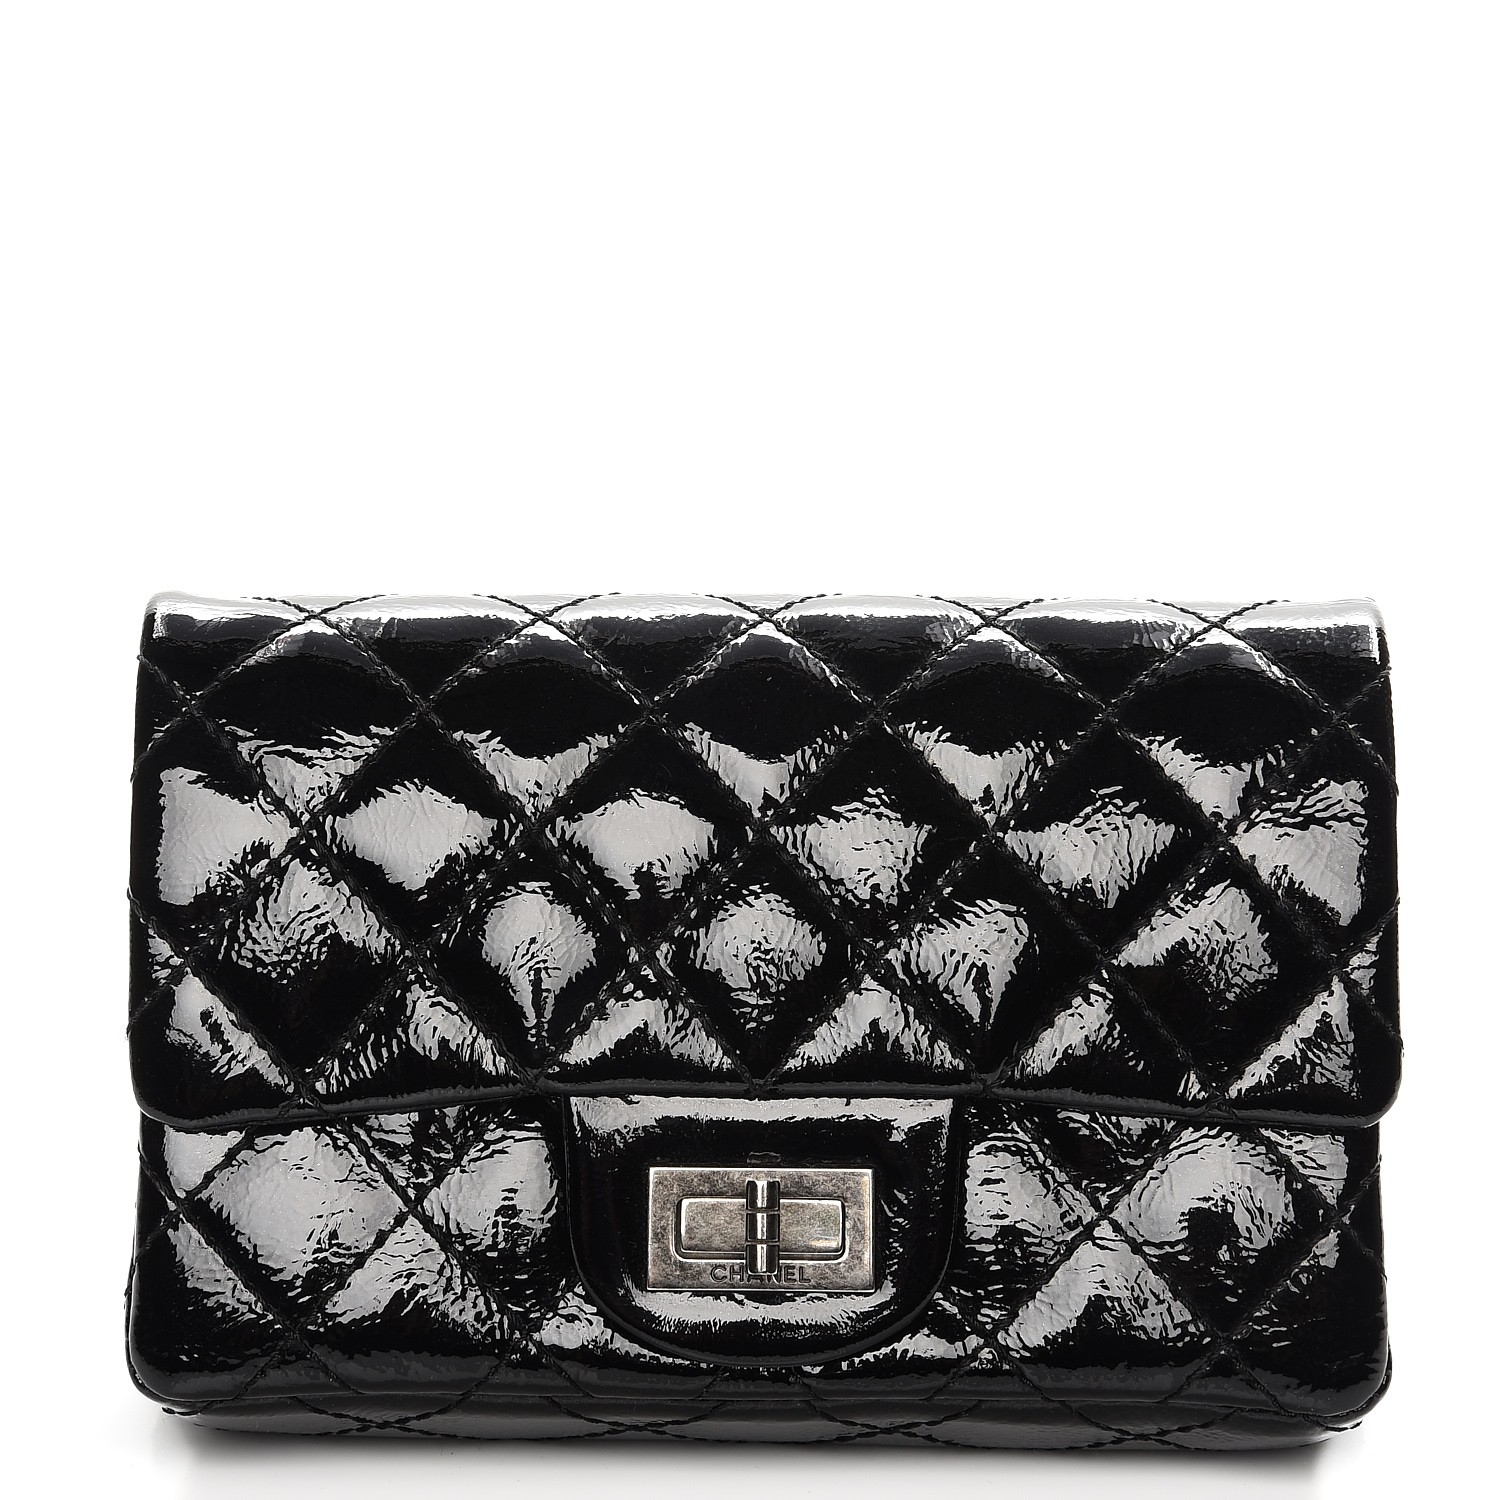 CHANEL Patent Quilted Reissue Flap Clutch Bag Black 253712